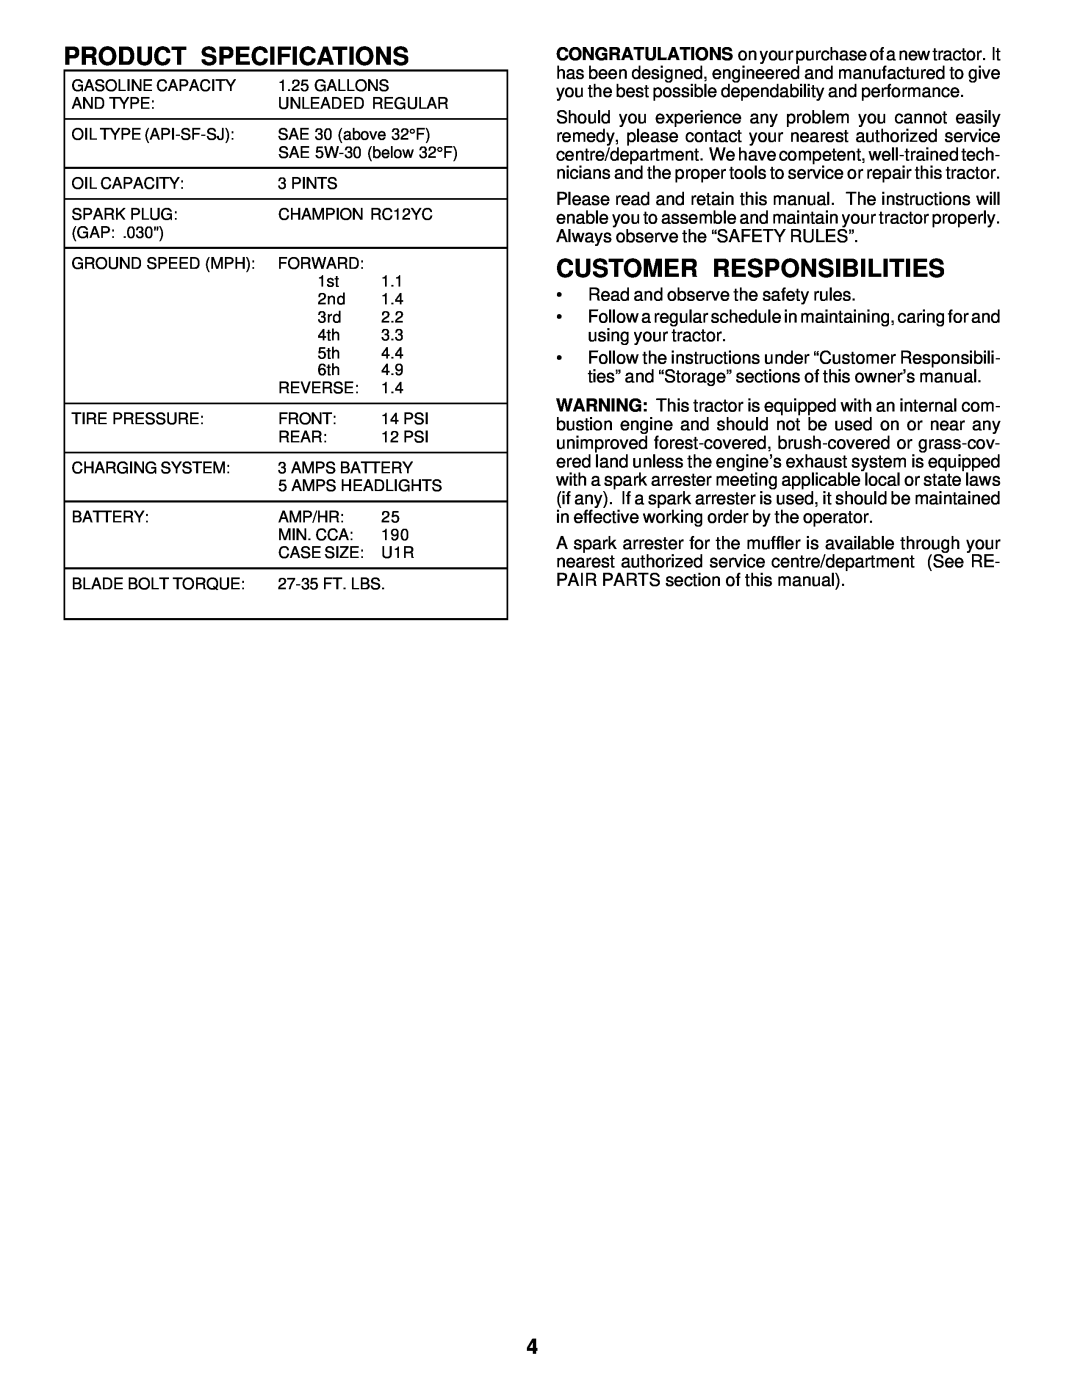 Poulan 176851 owner manual Product Specifications, Customer Responsibilities 